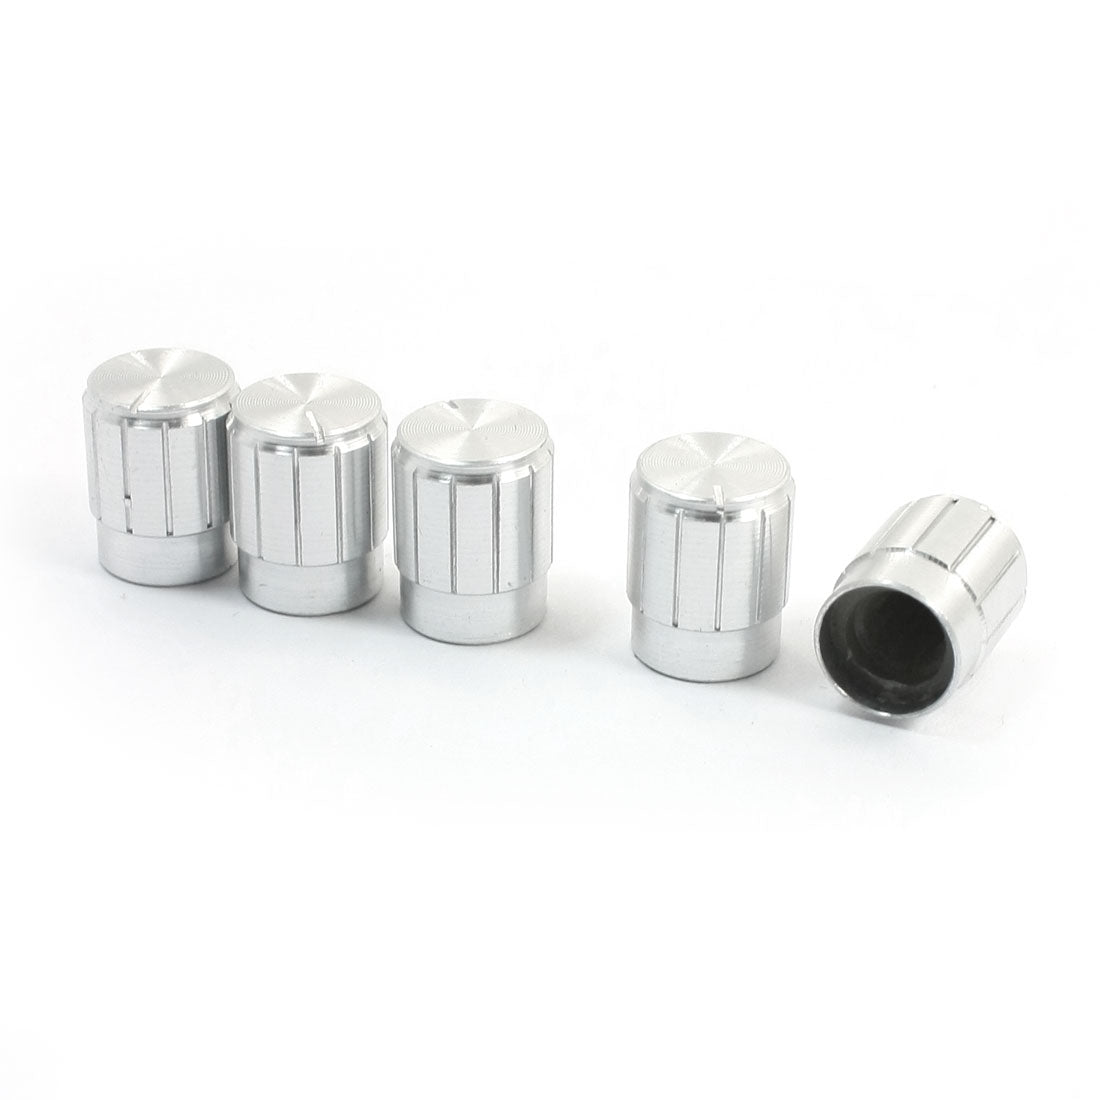 uxcell Uxcell 5 Pcs 13mm x 16.5mm Silver Tone Aluminium Alloy CD Amplifier Volume Control Knobs Caps for 6mm Knurled Shaft Potentiometer